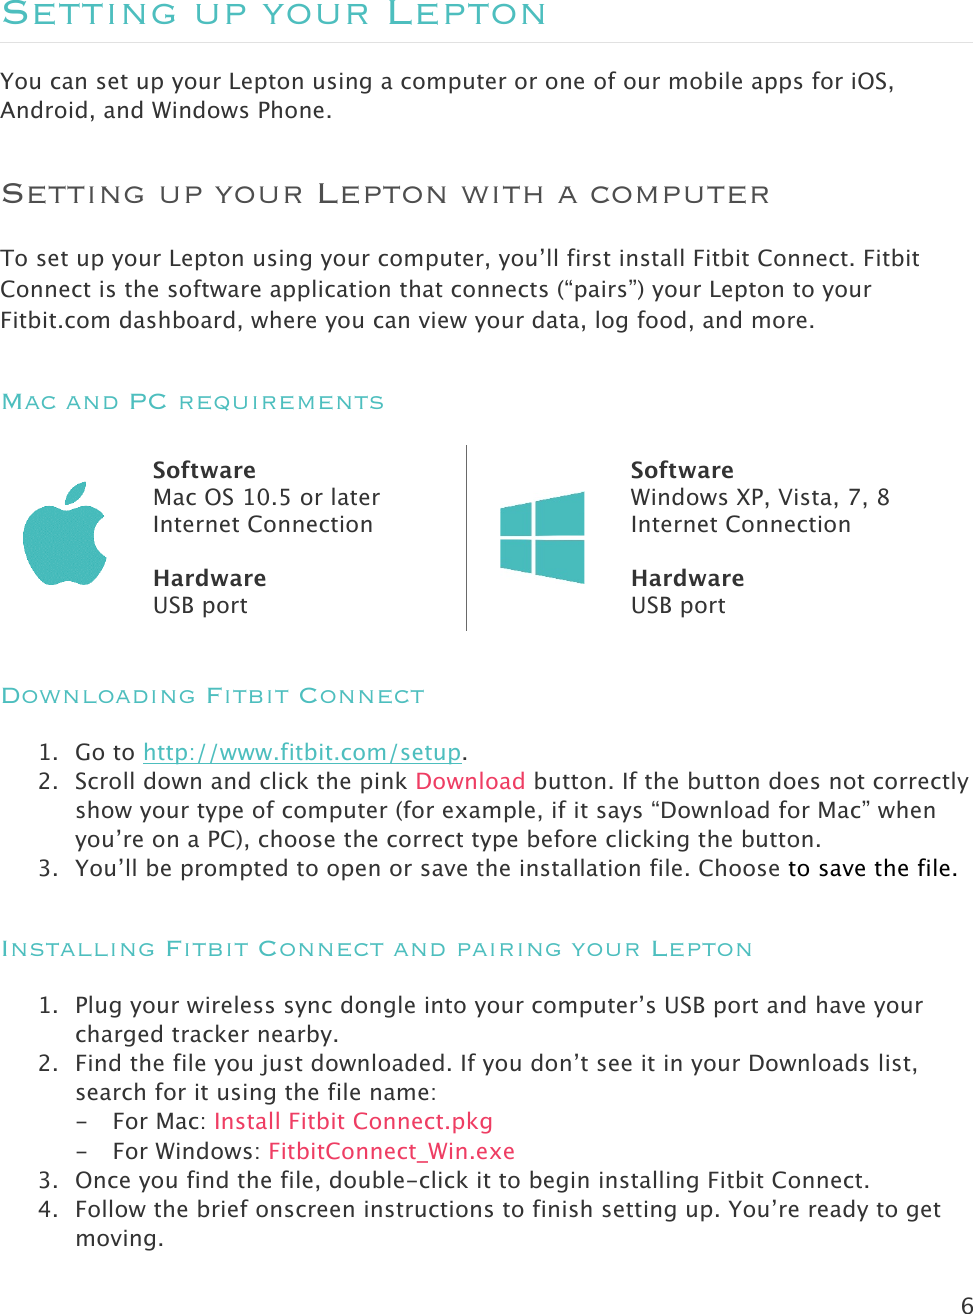 6   Setting up your Lepton You can set up your Lepton using a computer or one of our mobile apps for iOS, Android, and Windows Phone.  Setting up your Lepton with a computer To set up your Lepton using your computer, you’ll first install Fitbit Connect. Fitbit Connect is the software application that connects (“pairs”) your Lepton to your Fitbit.com dashboard, where you can view your data, log food, and more.  Mac and PC requirements  Software Mac OS 10.5 or later Internet Connection  Hardware USB port  Software Windows XP, Vista, 7, 8 Internet Connection  Hardware USB port Downloading Fitbit Connect  1. Go to http://www.fitbit.com/setup. 2. Scroll down and click the pink Download button. If the button does not correctly show your type of computer (for example, if it says “Download for Mac” when you’re on a PC), choose the correct type before clicking the button.  3. You’ll be prompted to open or save the installation file. Choose to save the file. Installing Fitbit Connect and pairing your Lepton 1. Plug your wireless sync dongle into your computer’s USB port and have your charged tracker nearby.  2. Find the file you just downloaded. If you don’t see it in your Downloads list, search for it using the file name:  - For Mac: Install Fitbit Connect.pkg - For Windows: FitbitConnect_Win.exe 3. Once you find the file, double-click it to begin installing Fitbit Connect. 4. Follow the brief onscreen instructions to finish setting up. You’re ready to get moving. 